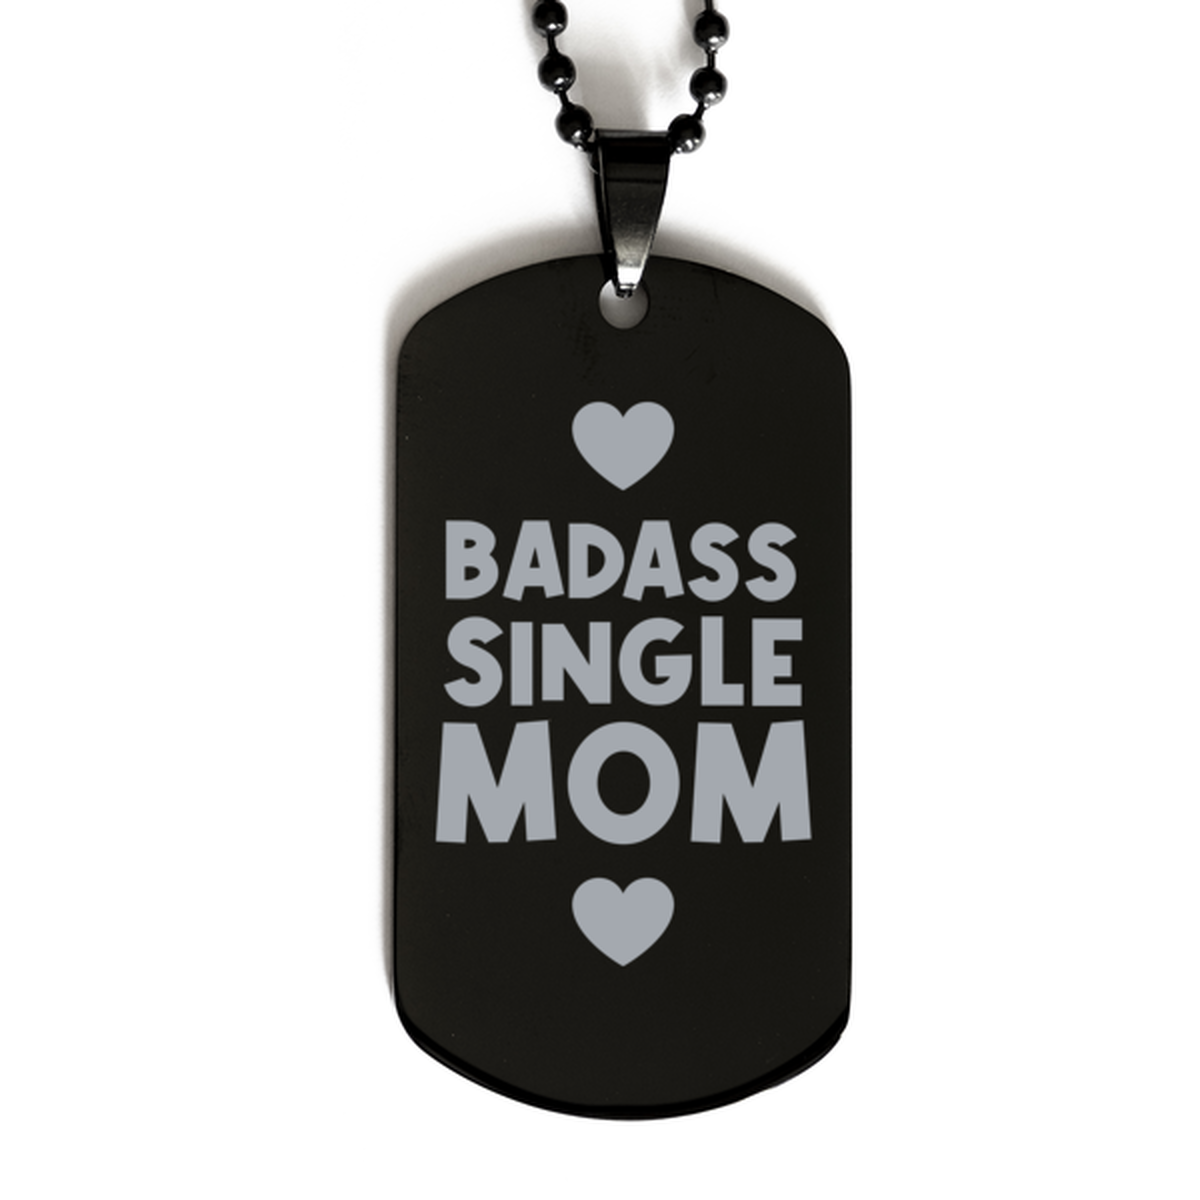 Single mom Black Dog Tag, Badass Single mom, Funny Family Gifts  Necklace For Single mom From Son Daughter